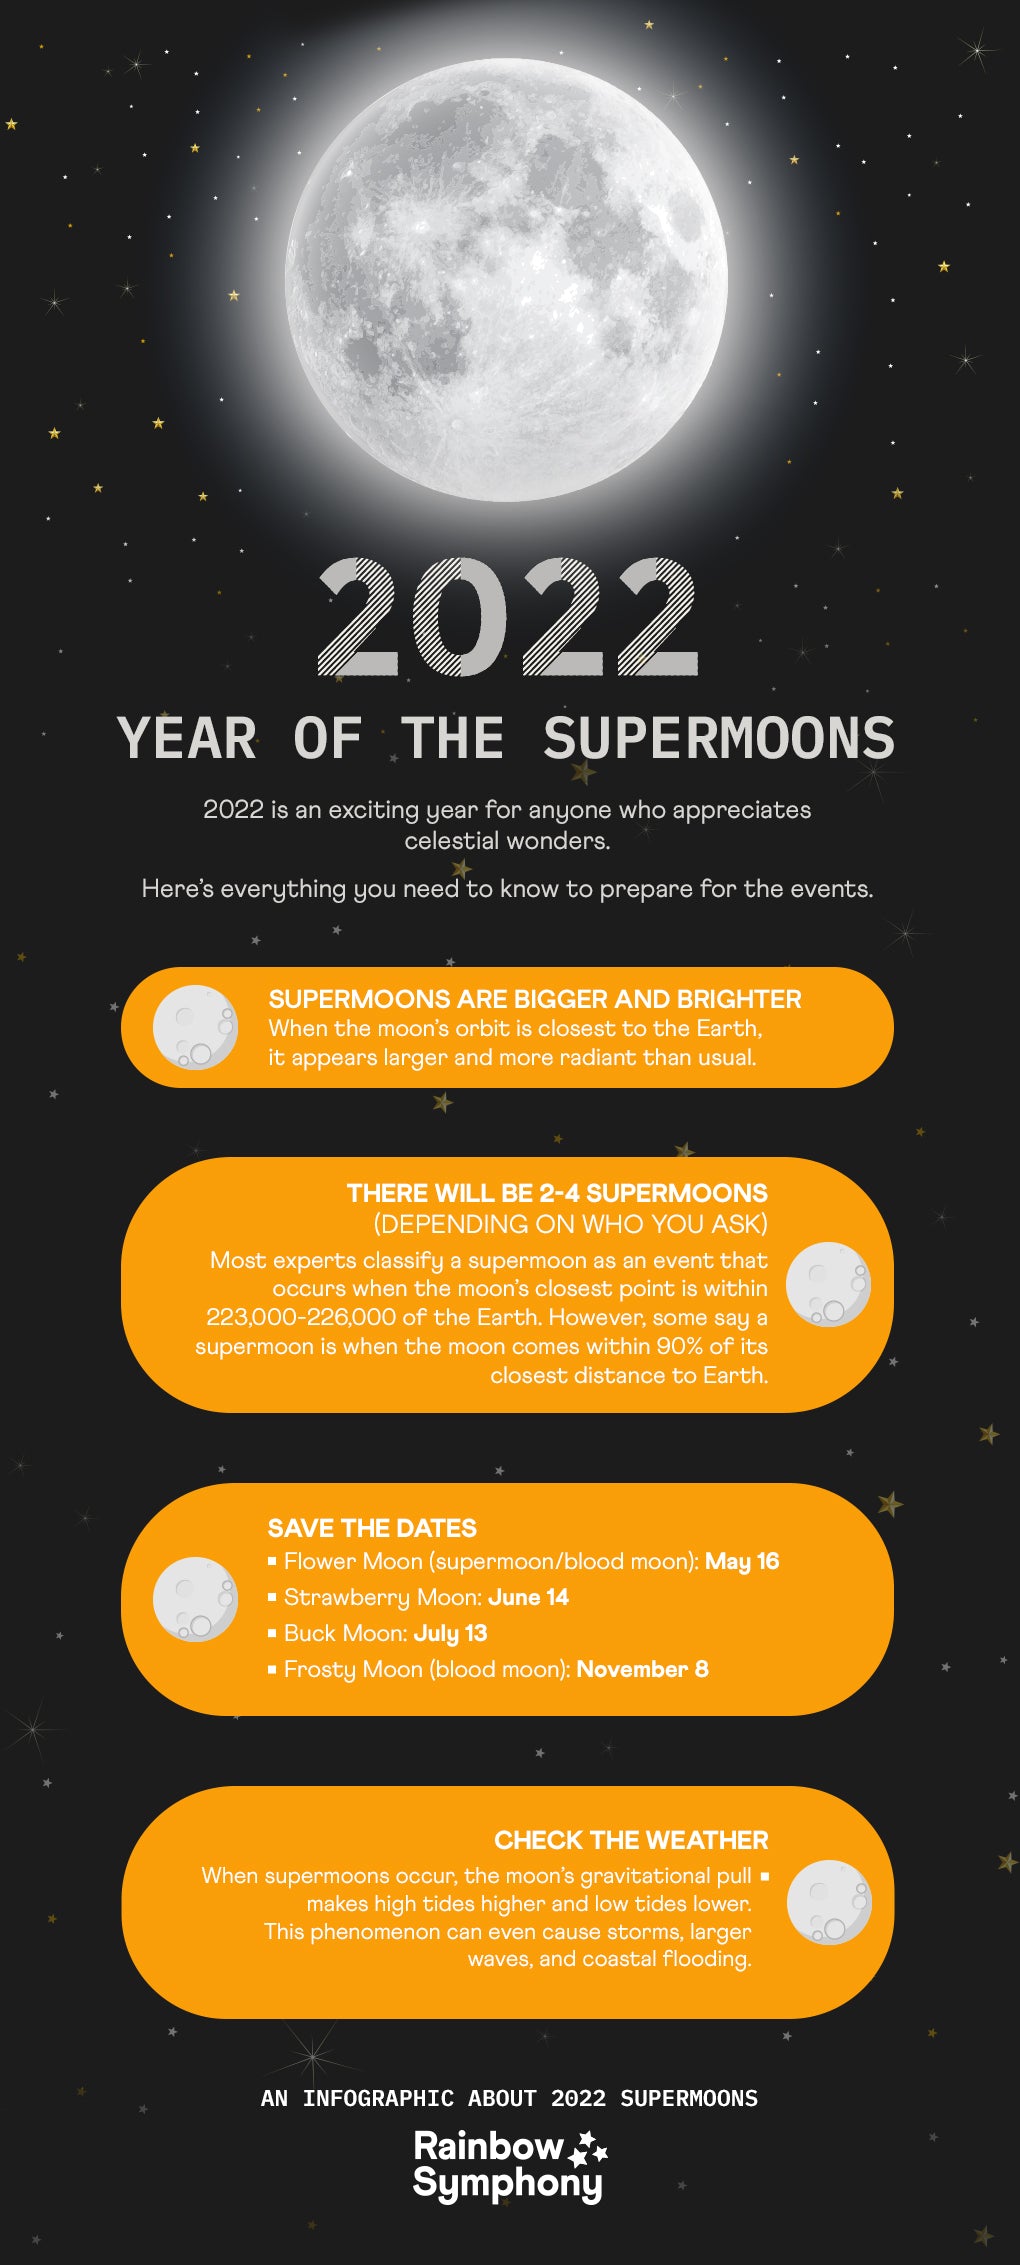 2022 YEAR OF THE SUPERMOONS